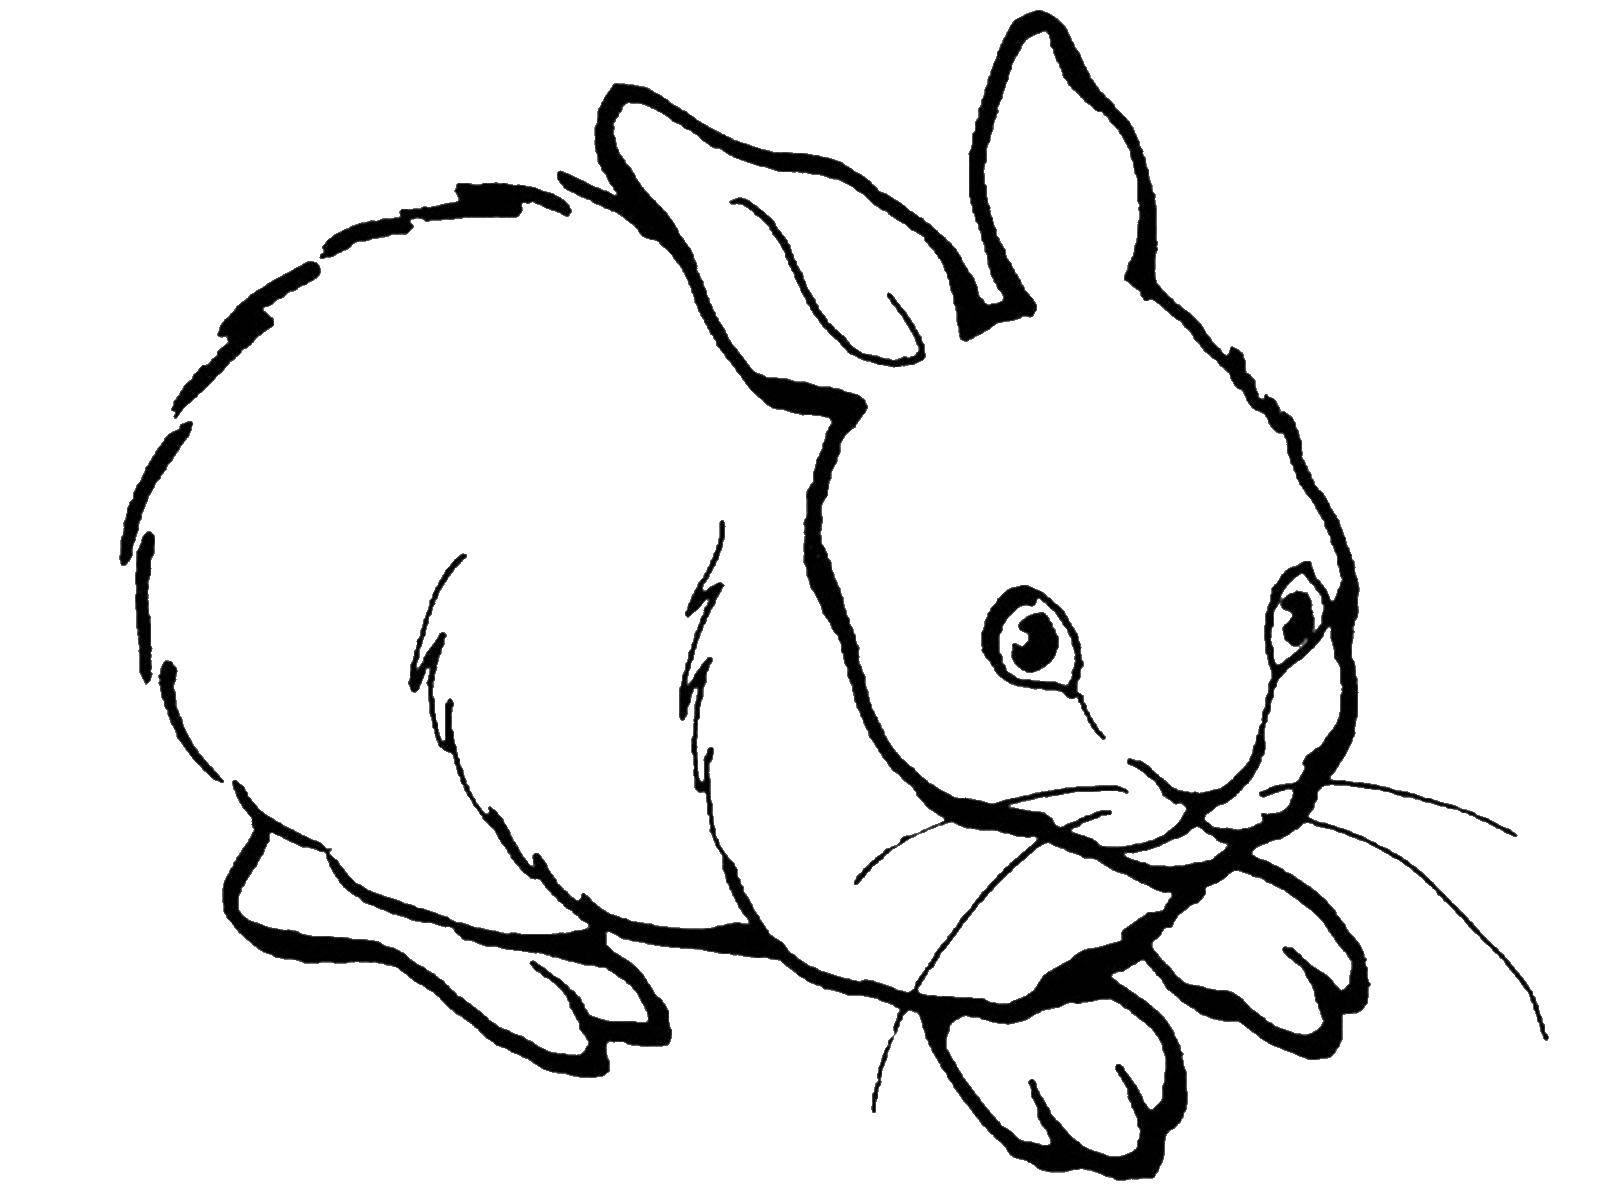 Coloring Coward. Category Pets allowed. Tags:  Animals, Bunny.